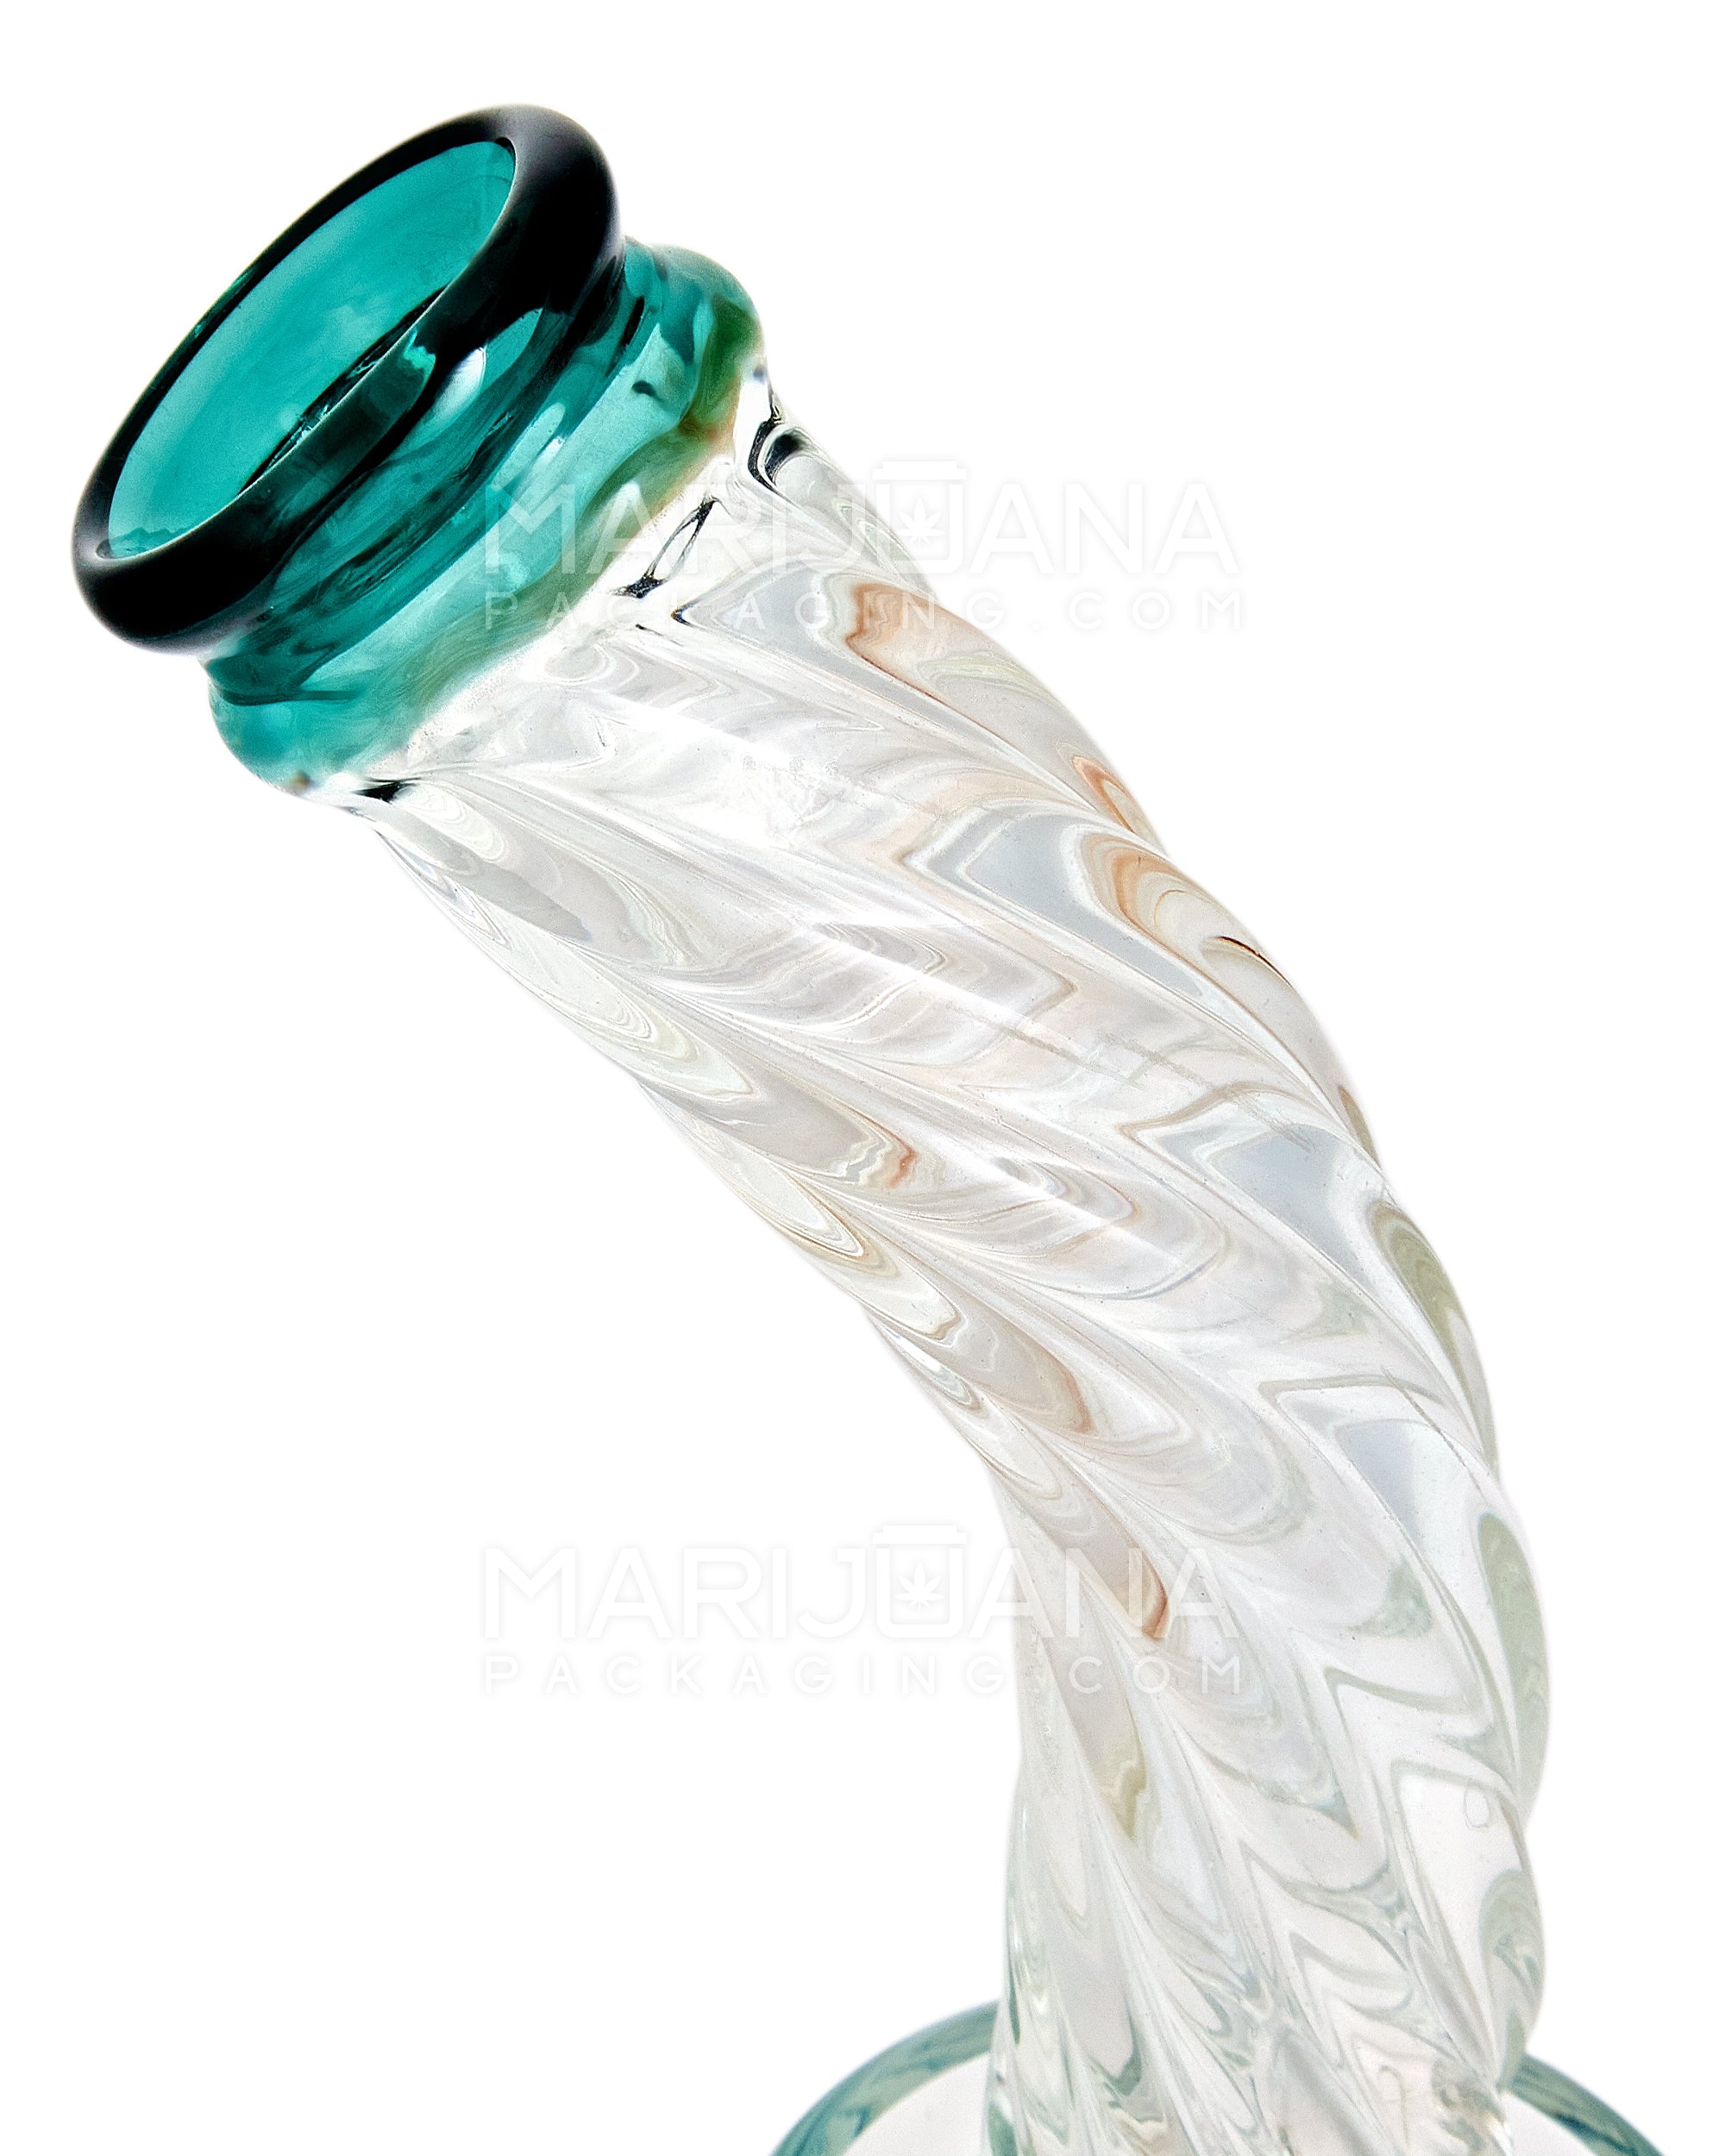 Spiral Neck Matrix Perc Glass Water Pipe w/ Thick Base | 8in Tall - 14mm Bowl - Teal - 4